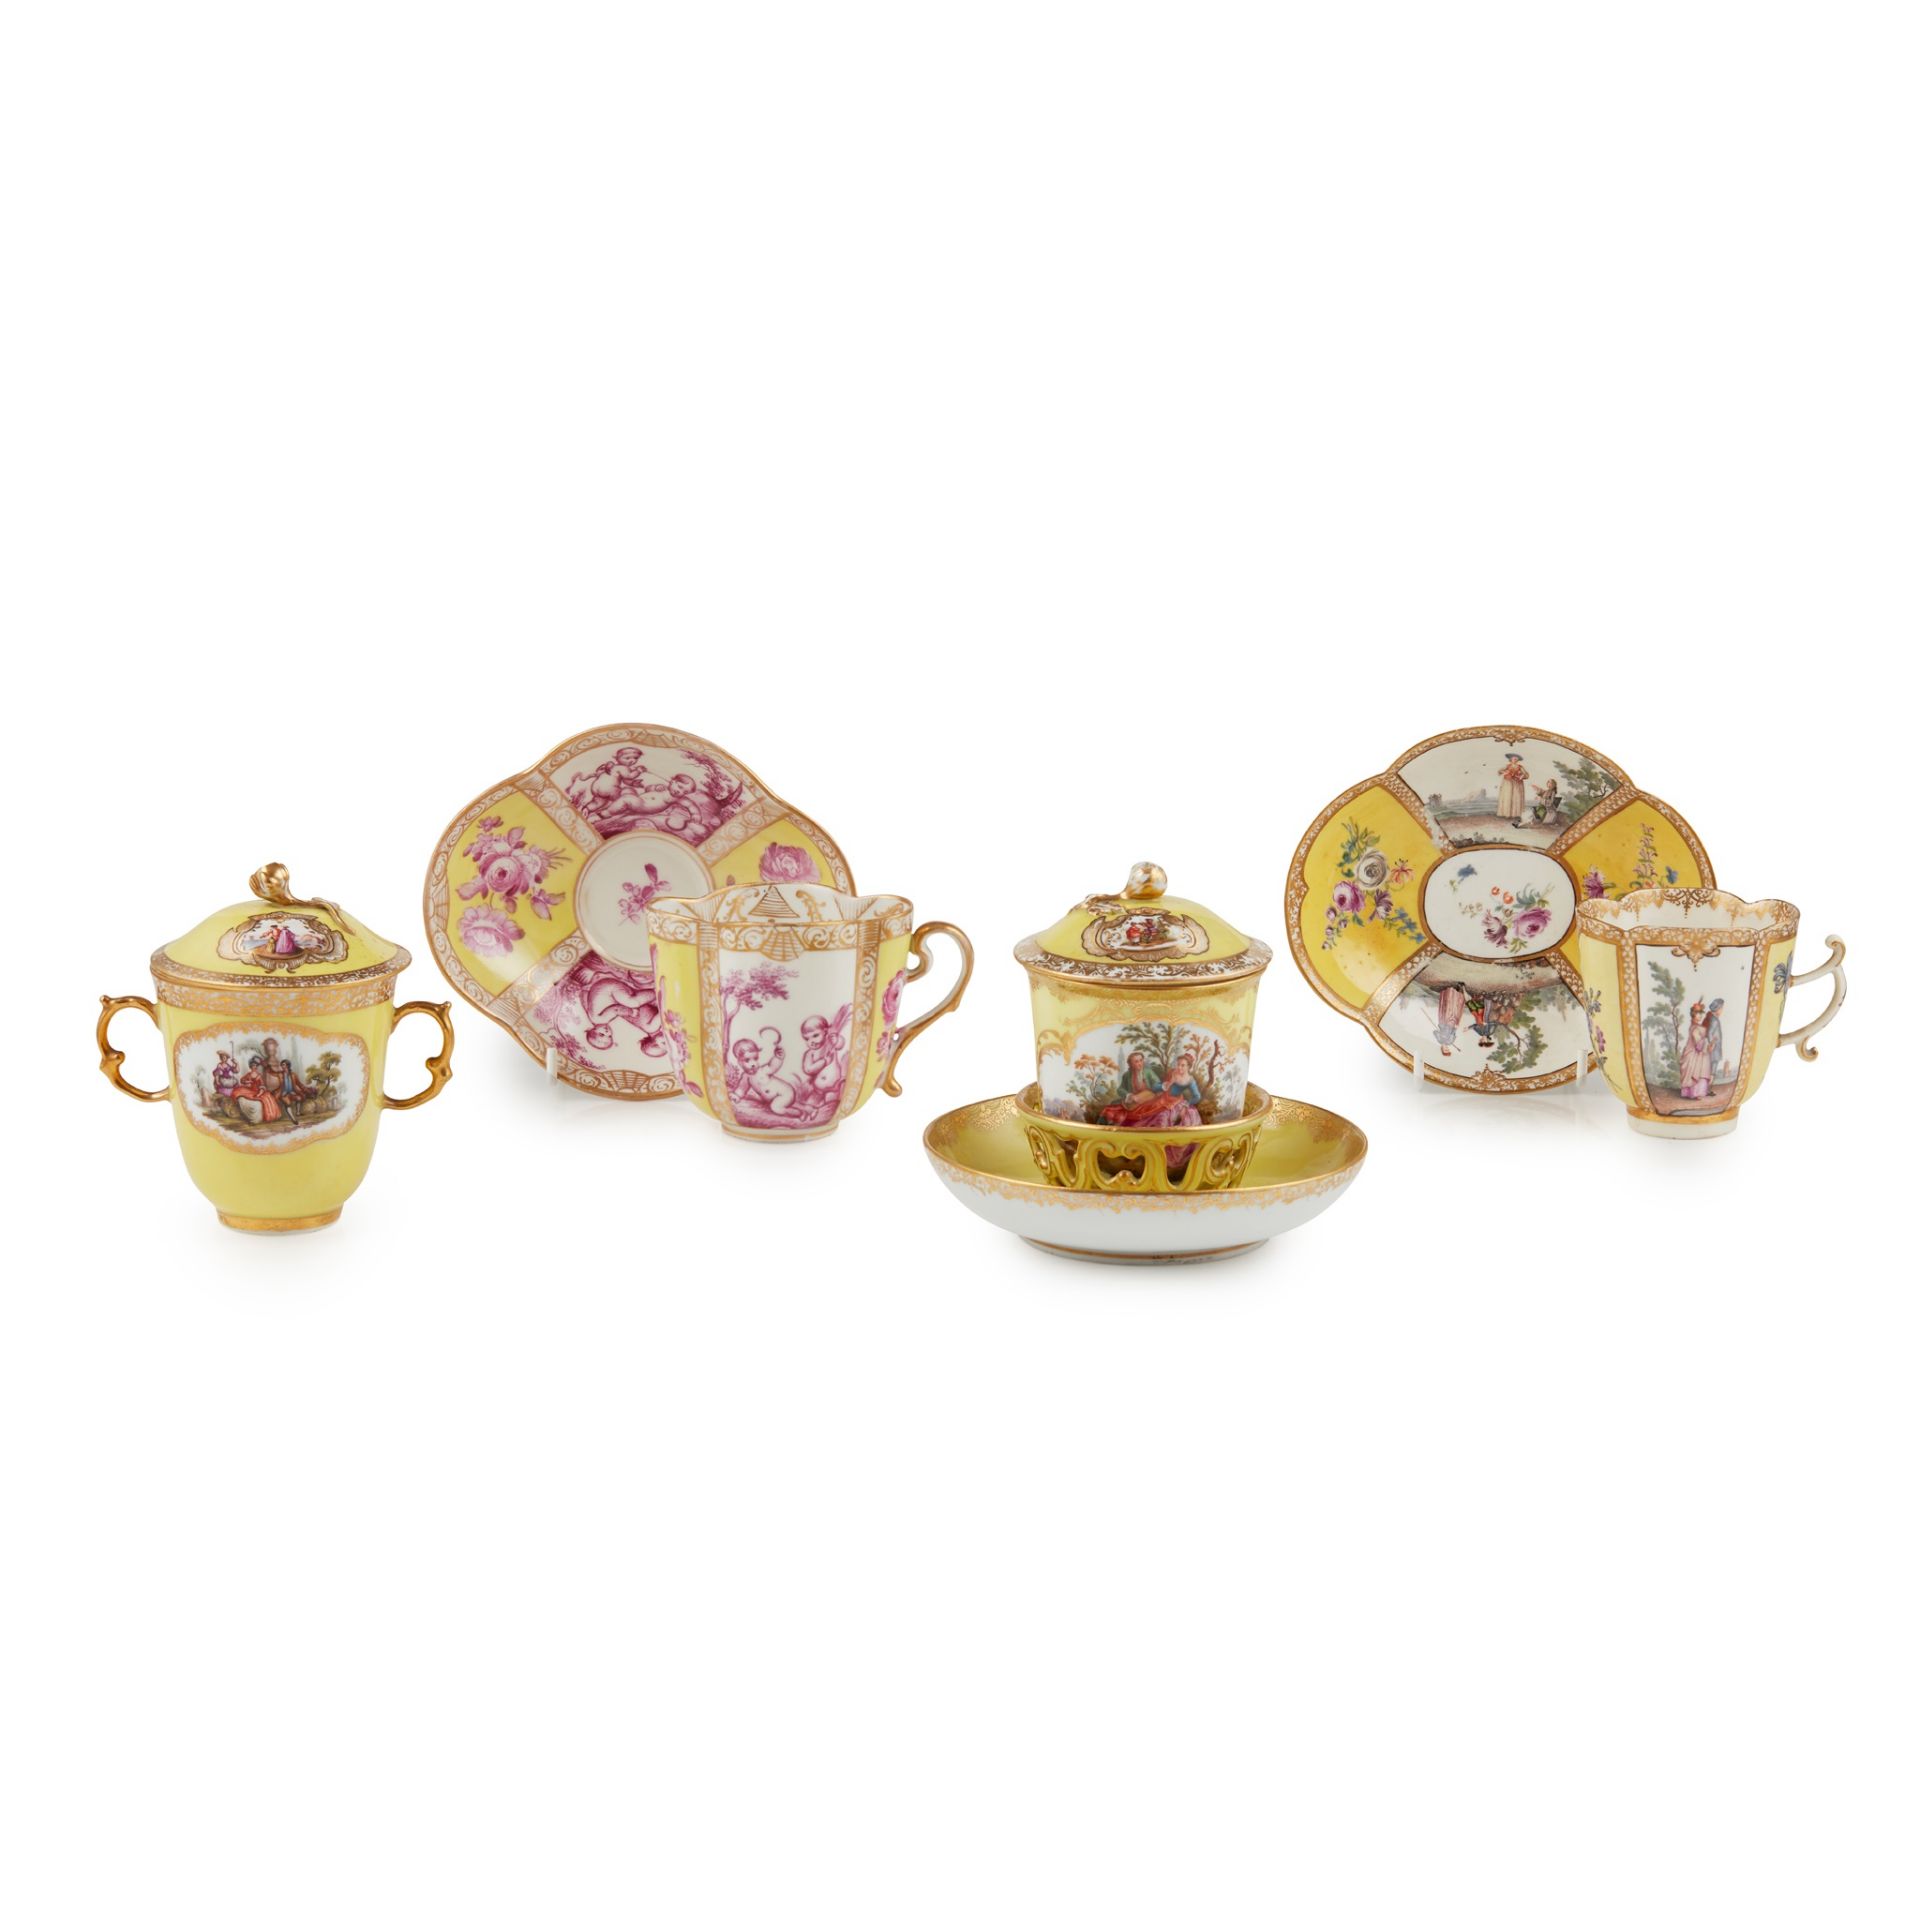 GROUP OF MEISSEN YELLOW GROUND CUPS AND SAUCERS 19TH CENTURY